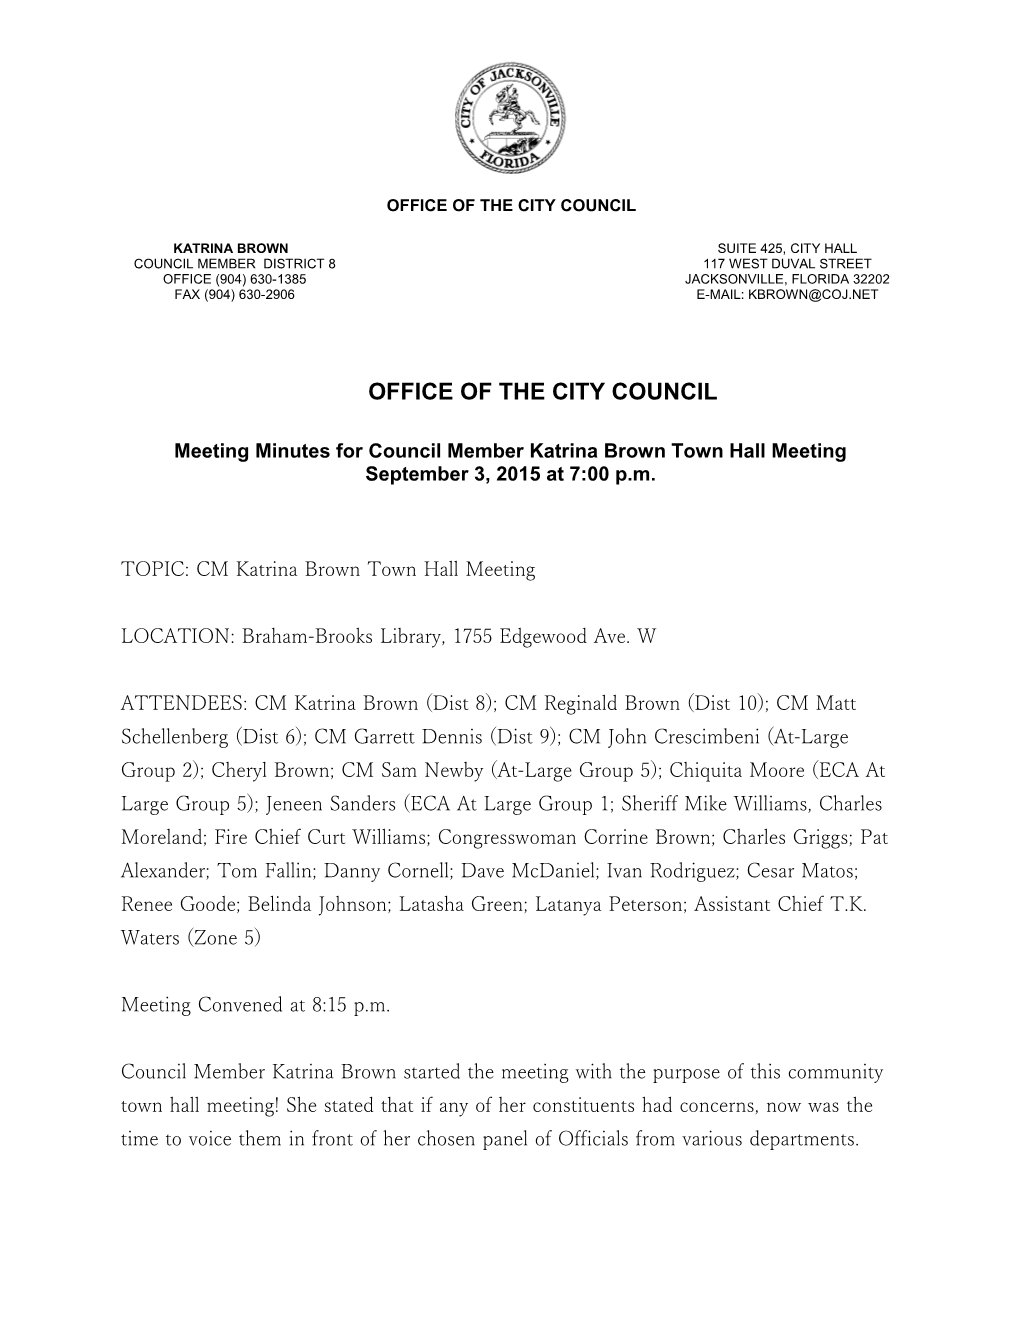 Meeting Minutes for Council Member Katrina Brown Town Hall Meeting